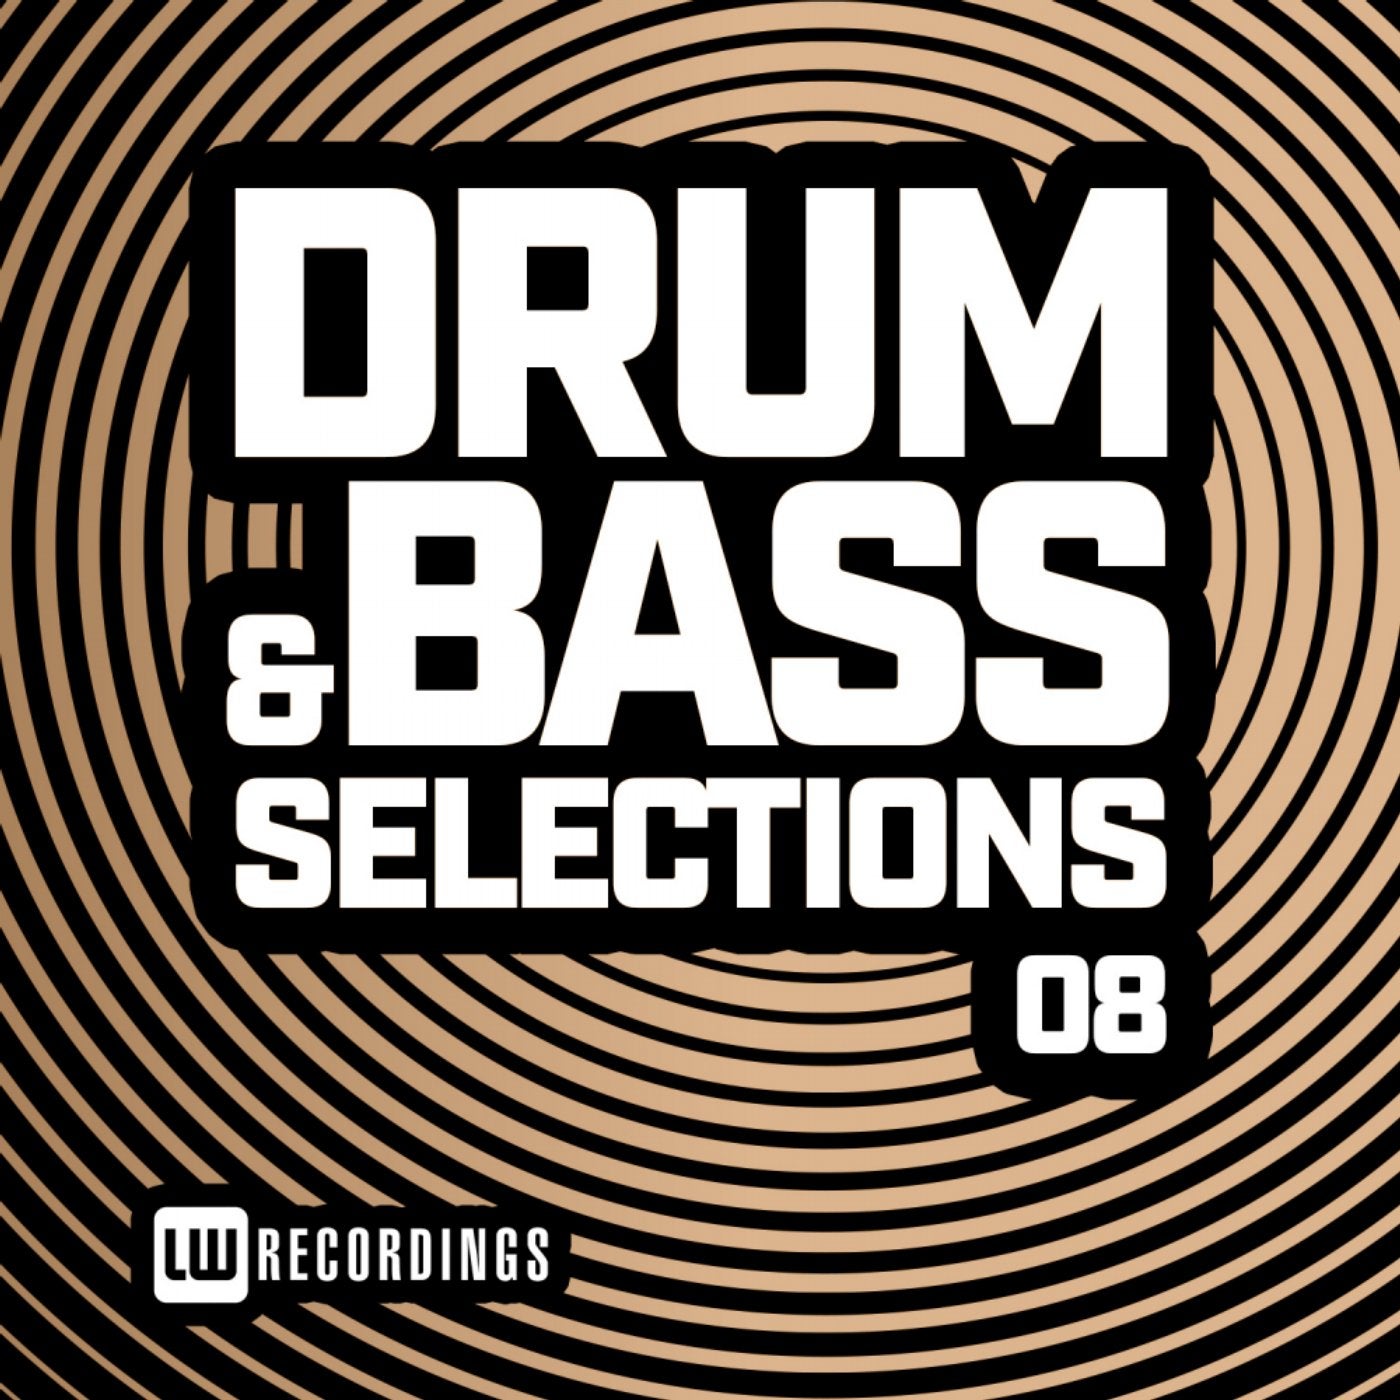 Drum & Bass Selections, Vol. 08